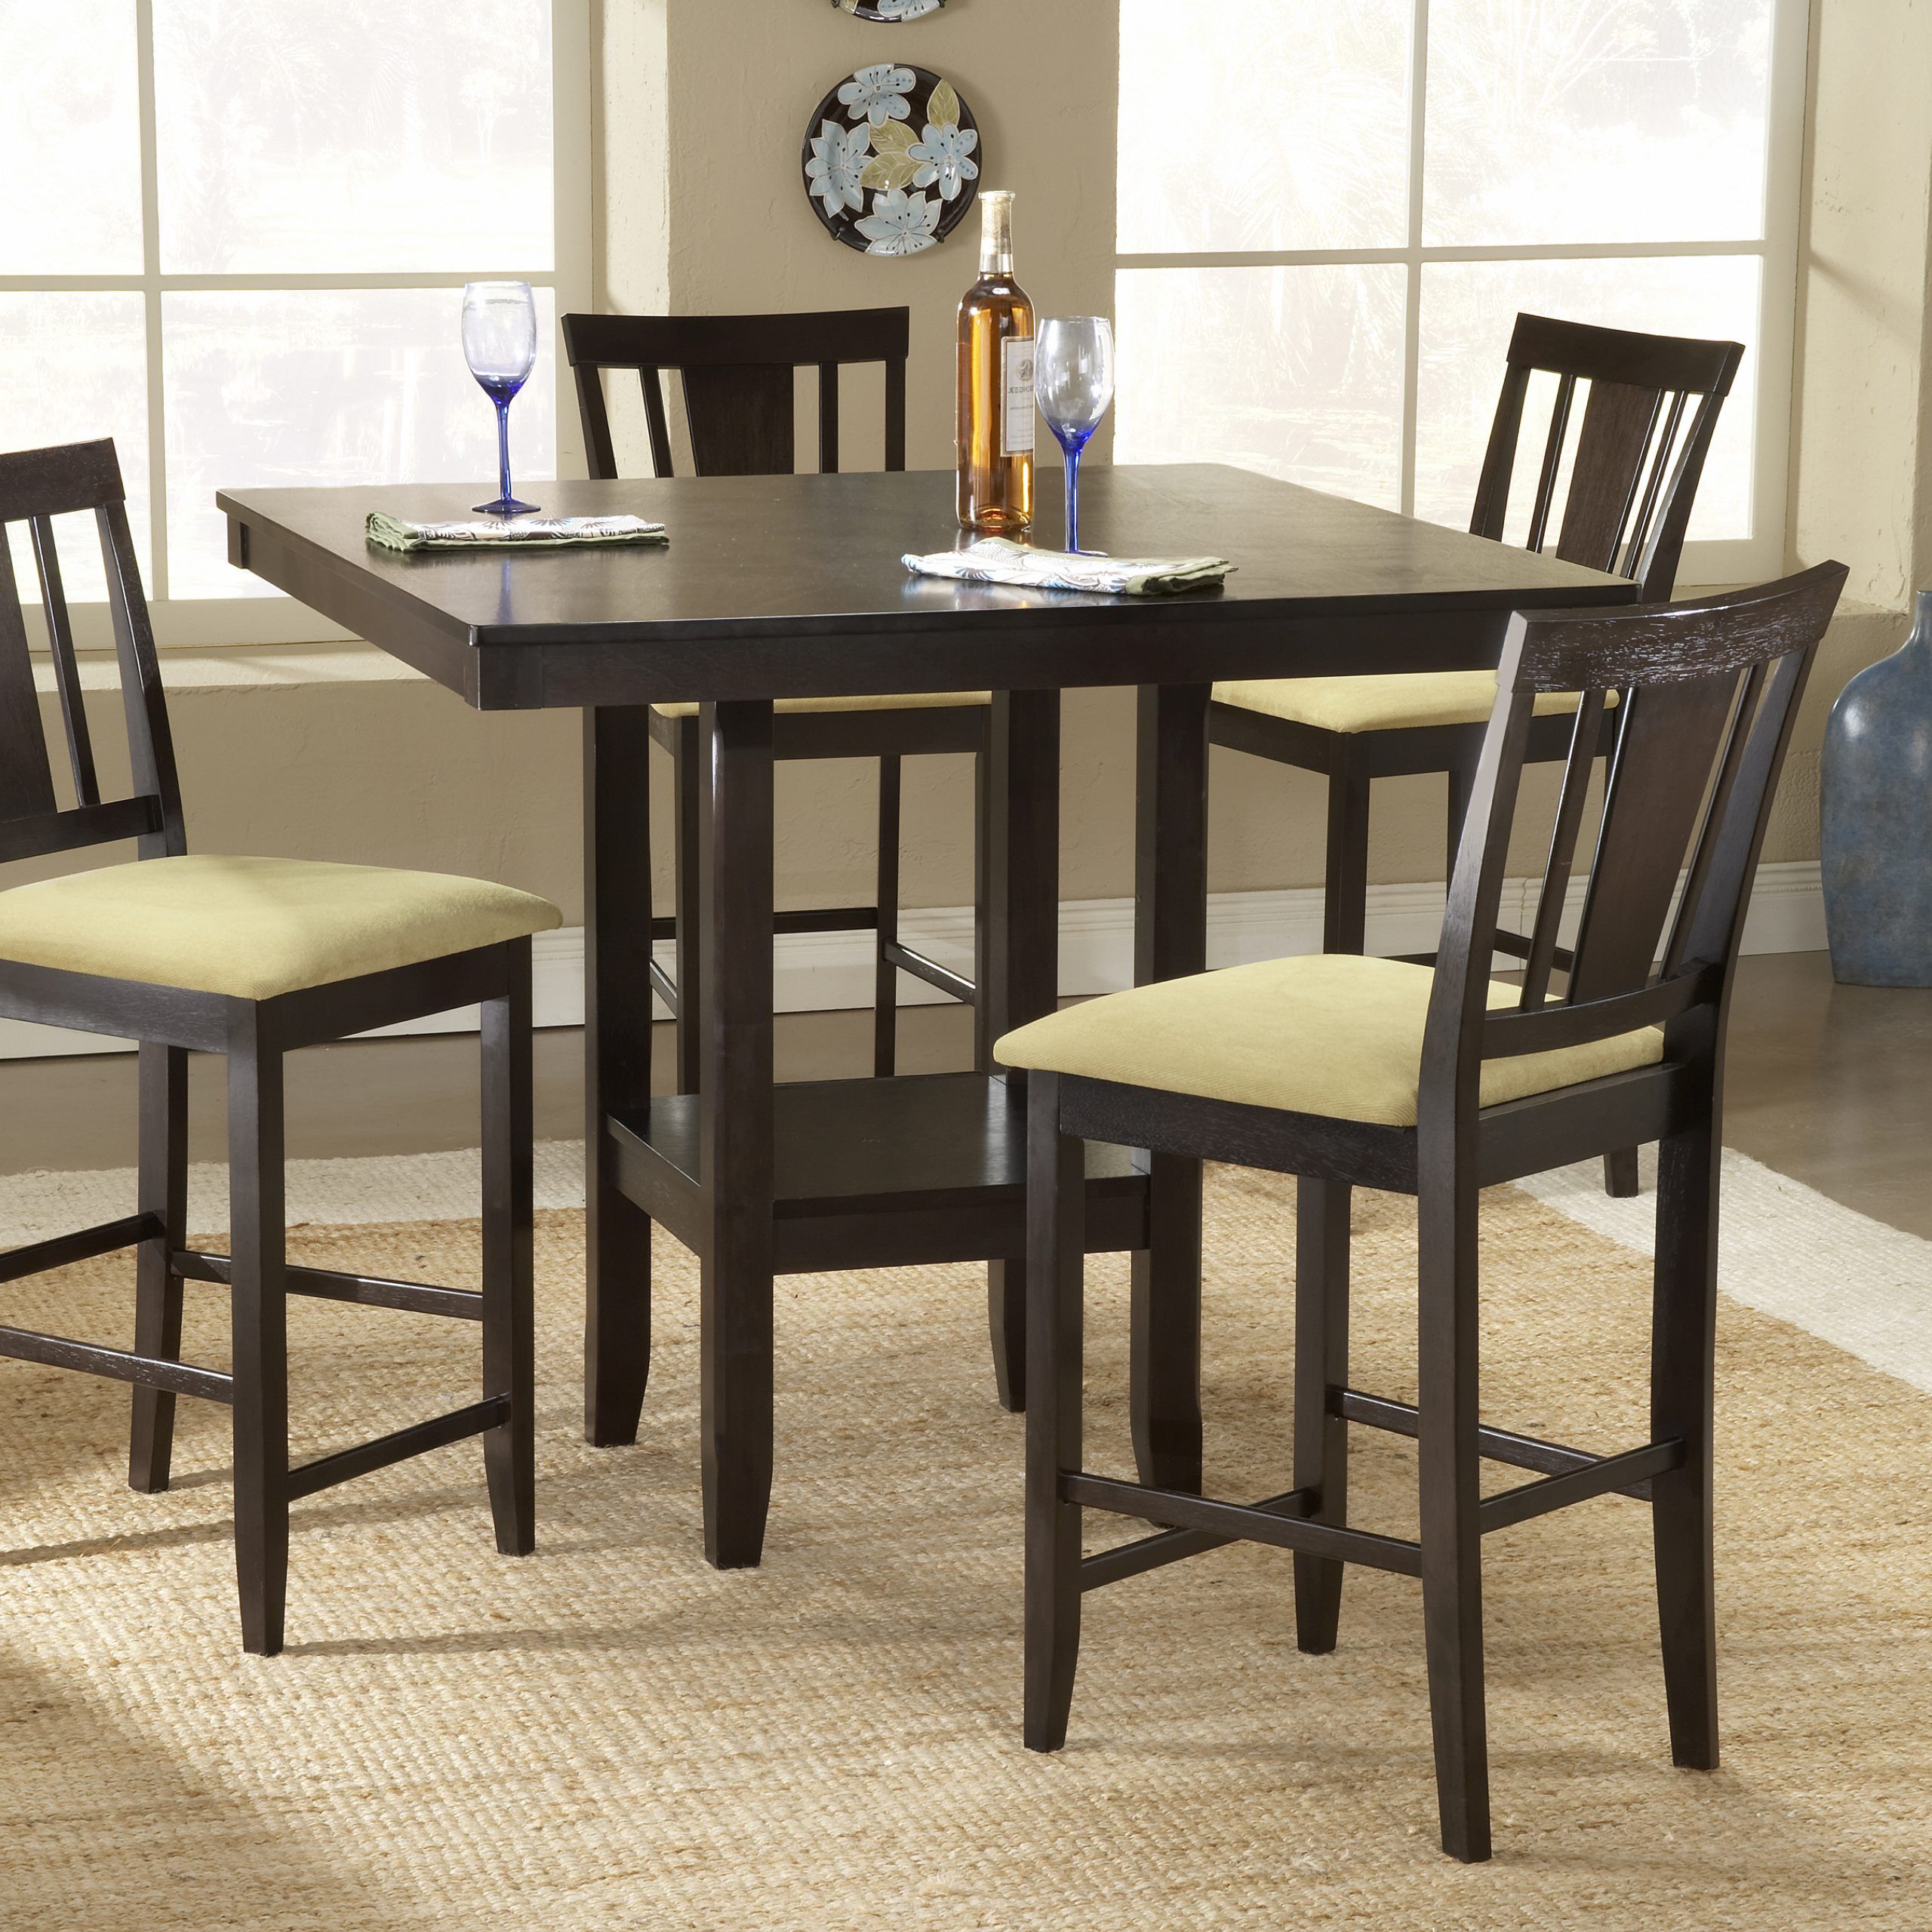 Counter Height Dinette Sets – Homesfeed Intended For Most Recent Counter Height Dining Tables (View 10 of 20)